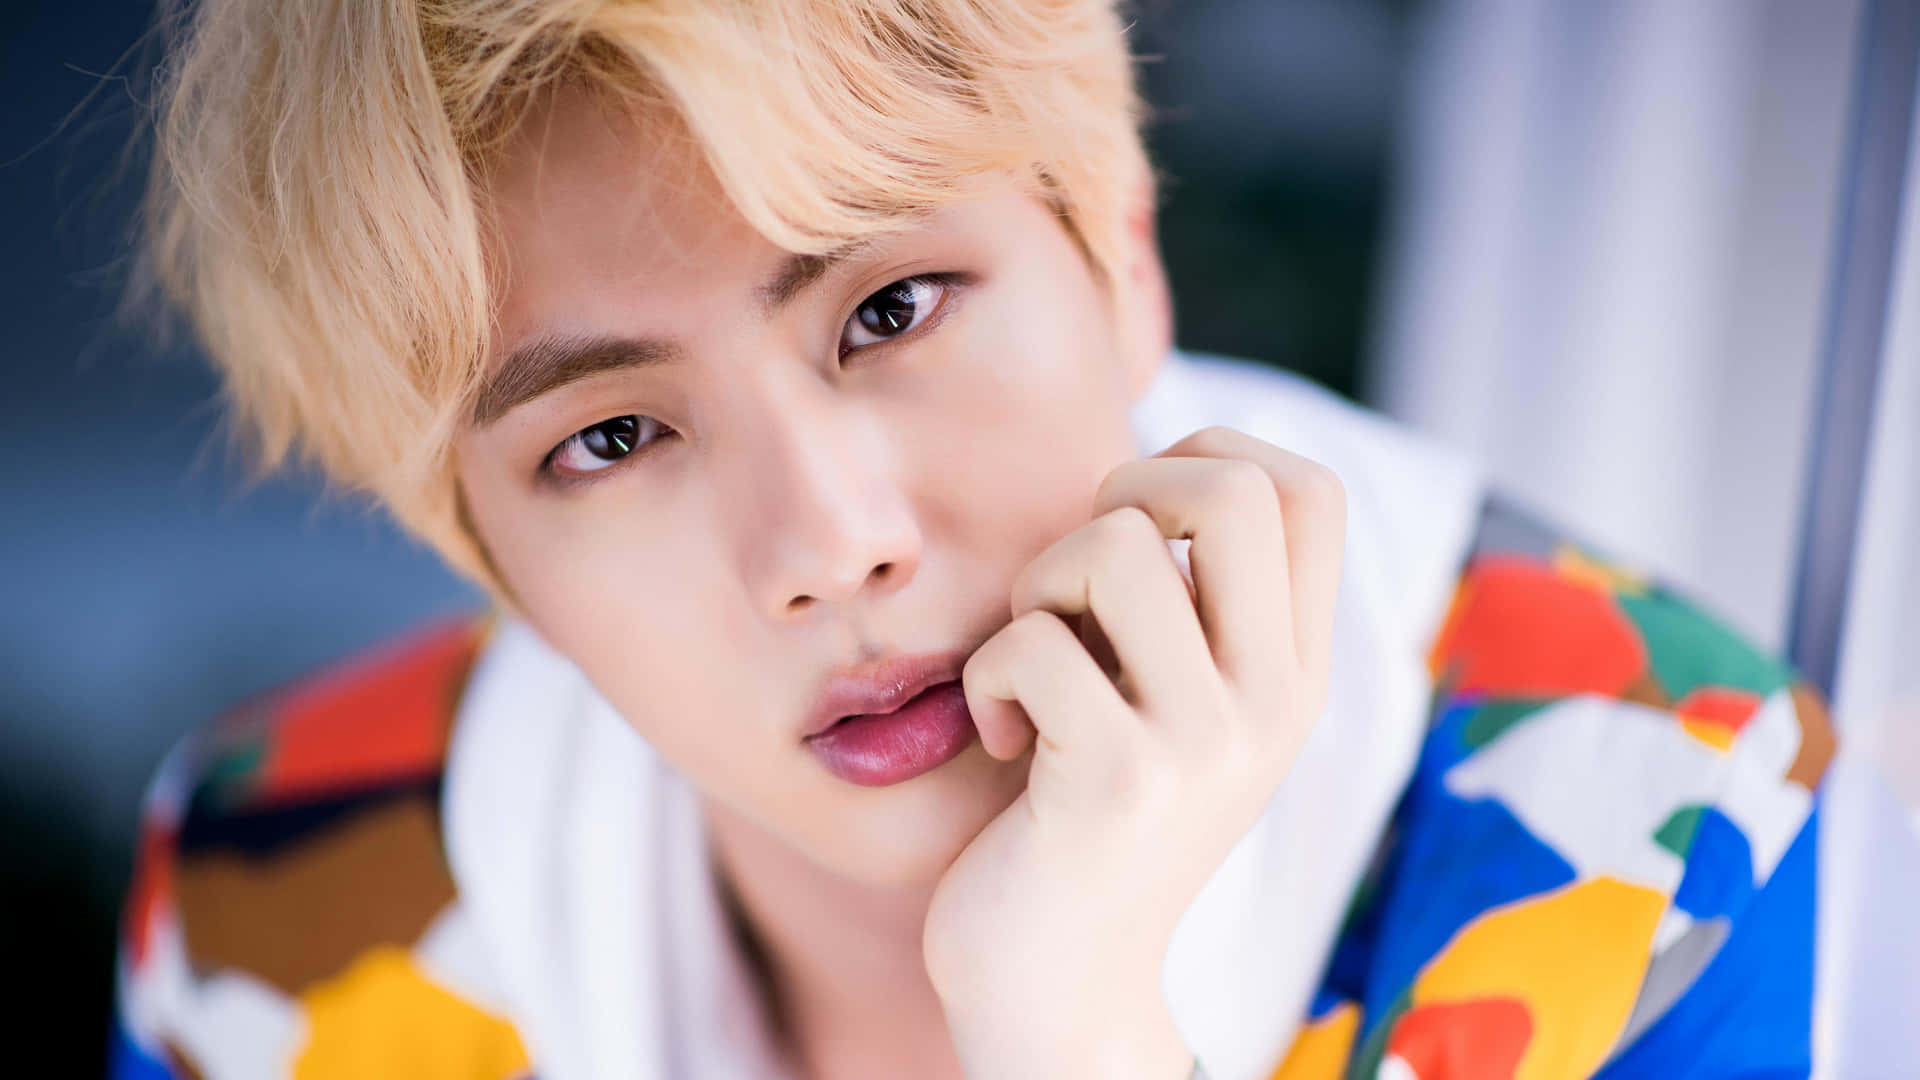 Jin, a singer, songwriter, actor, and poet from South Korea